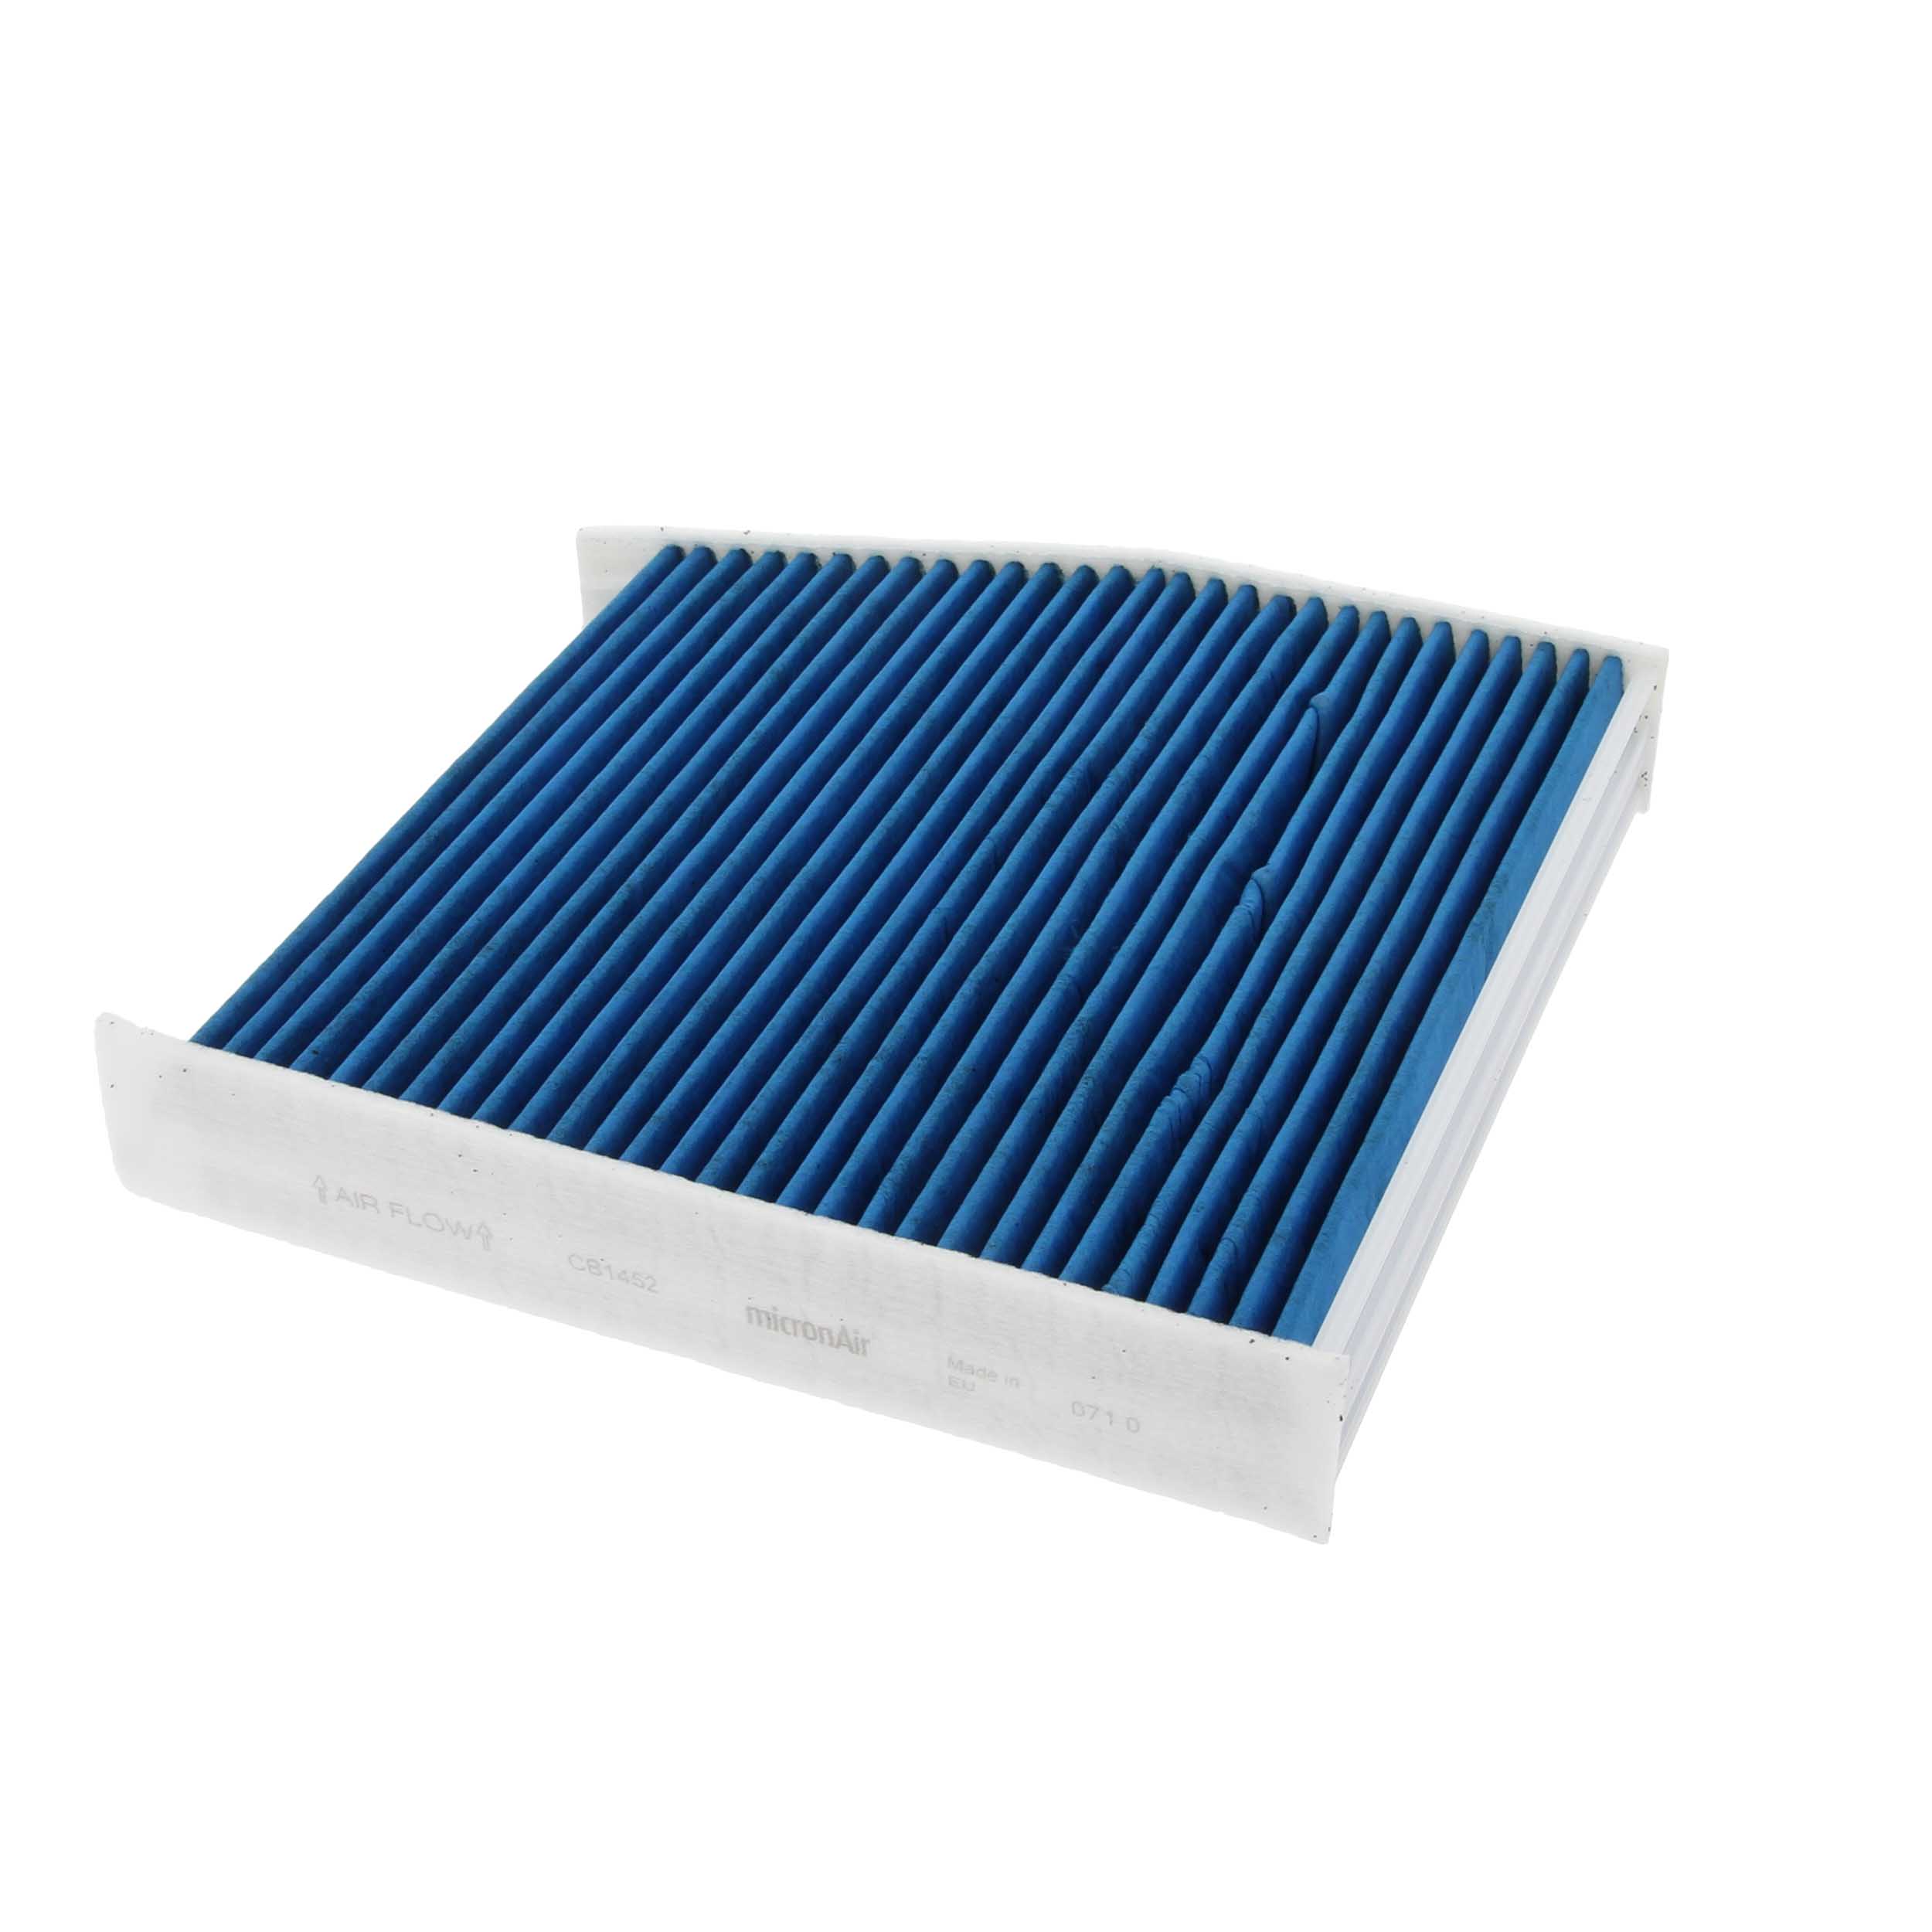 CB1452 CORTECO Particulate filter (PM 2.5), with anti-allergic effect, with antibacterial action, with fungicidal effect, 255 mm x 255 mm x 45 mm Width: 255mm, Height: 45mm, Length: 255mm Cabin filter 49408538 buy